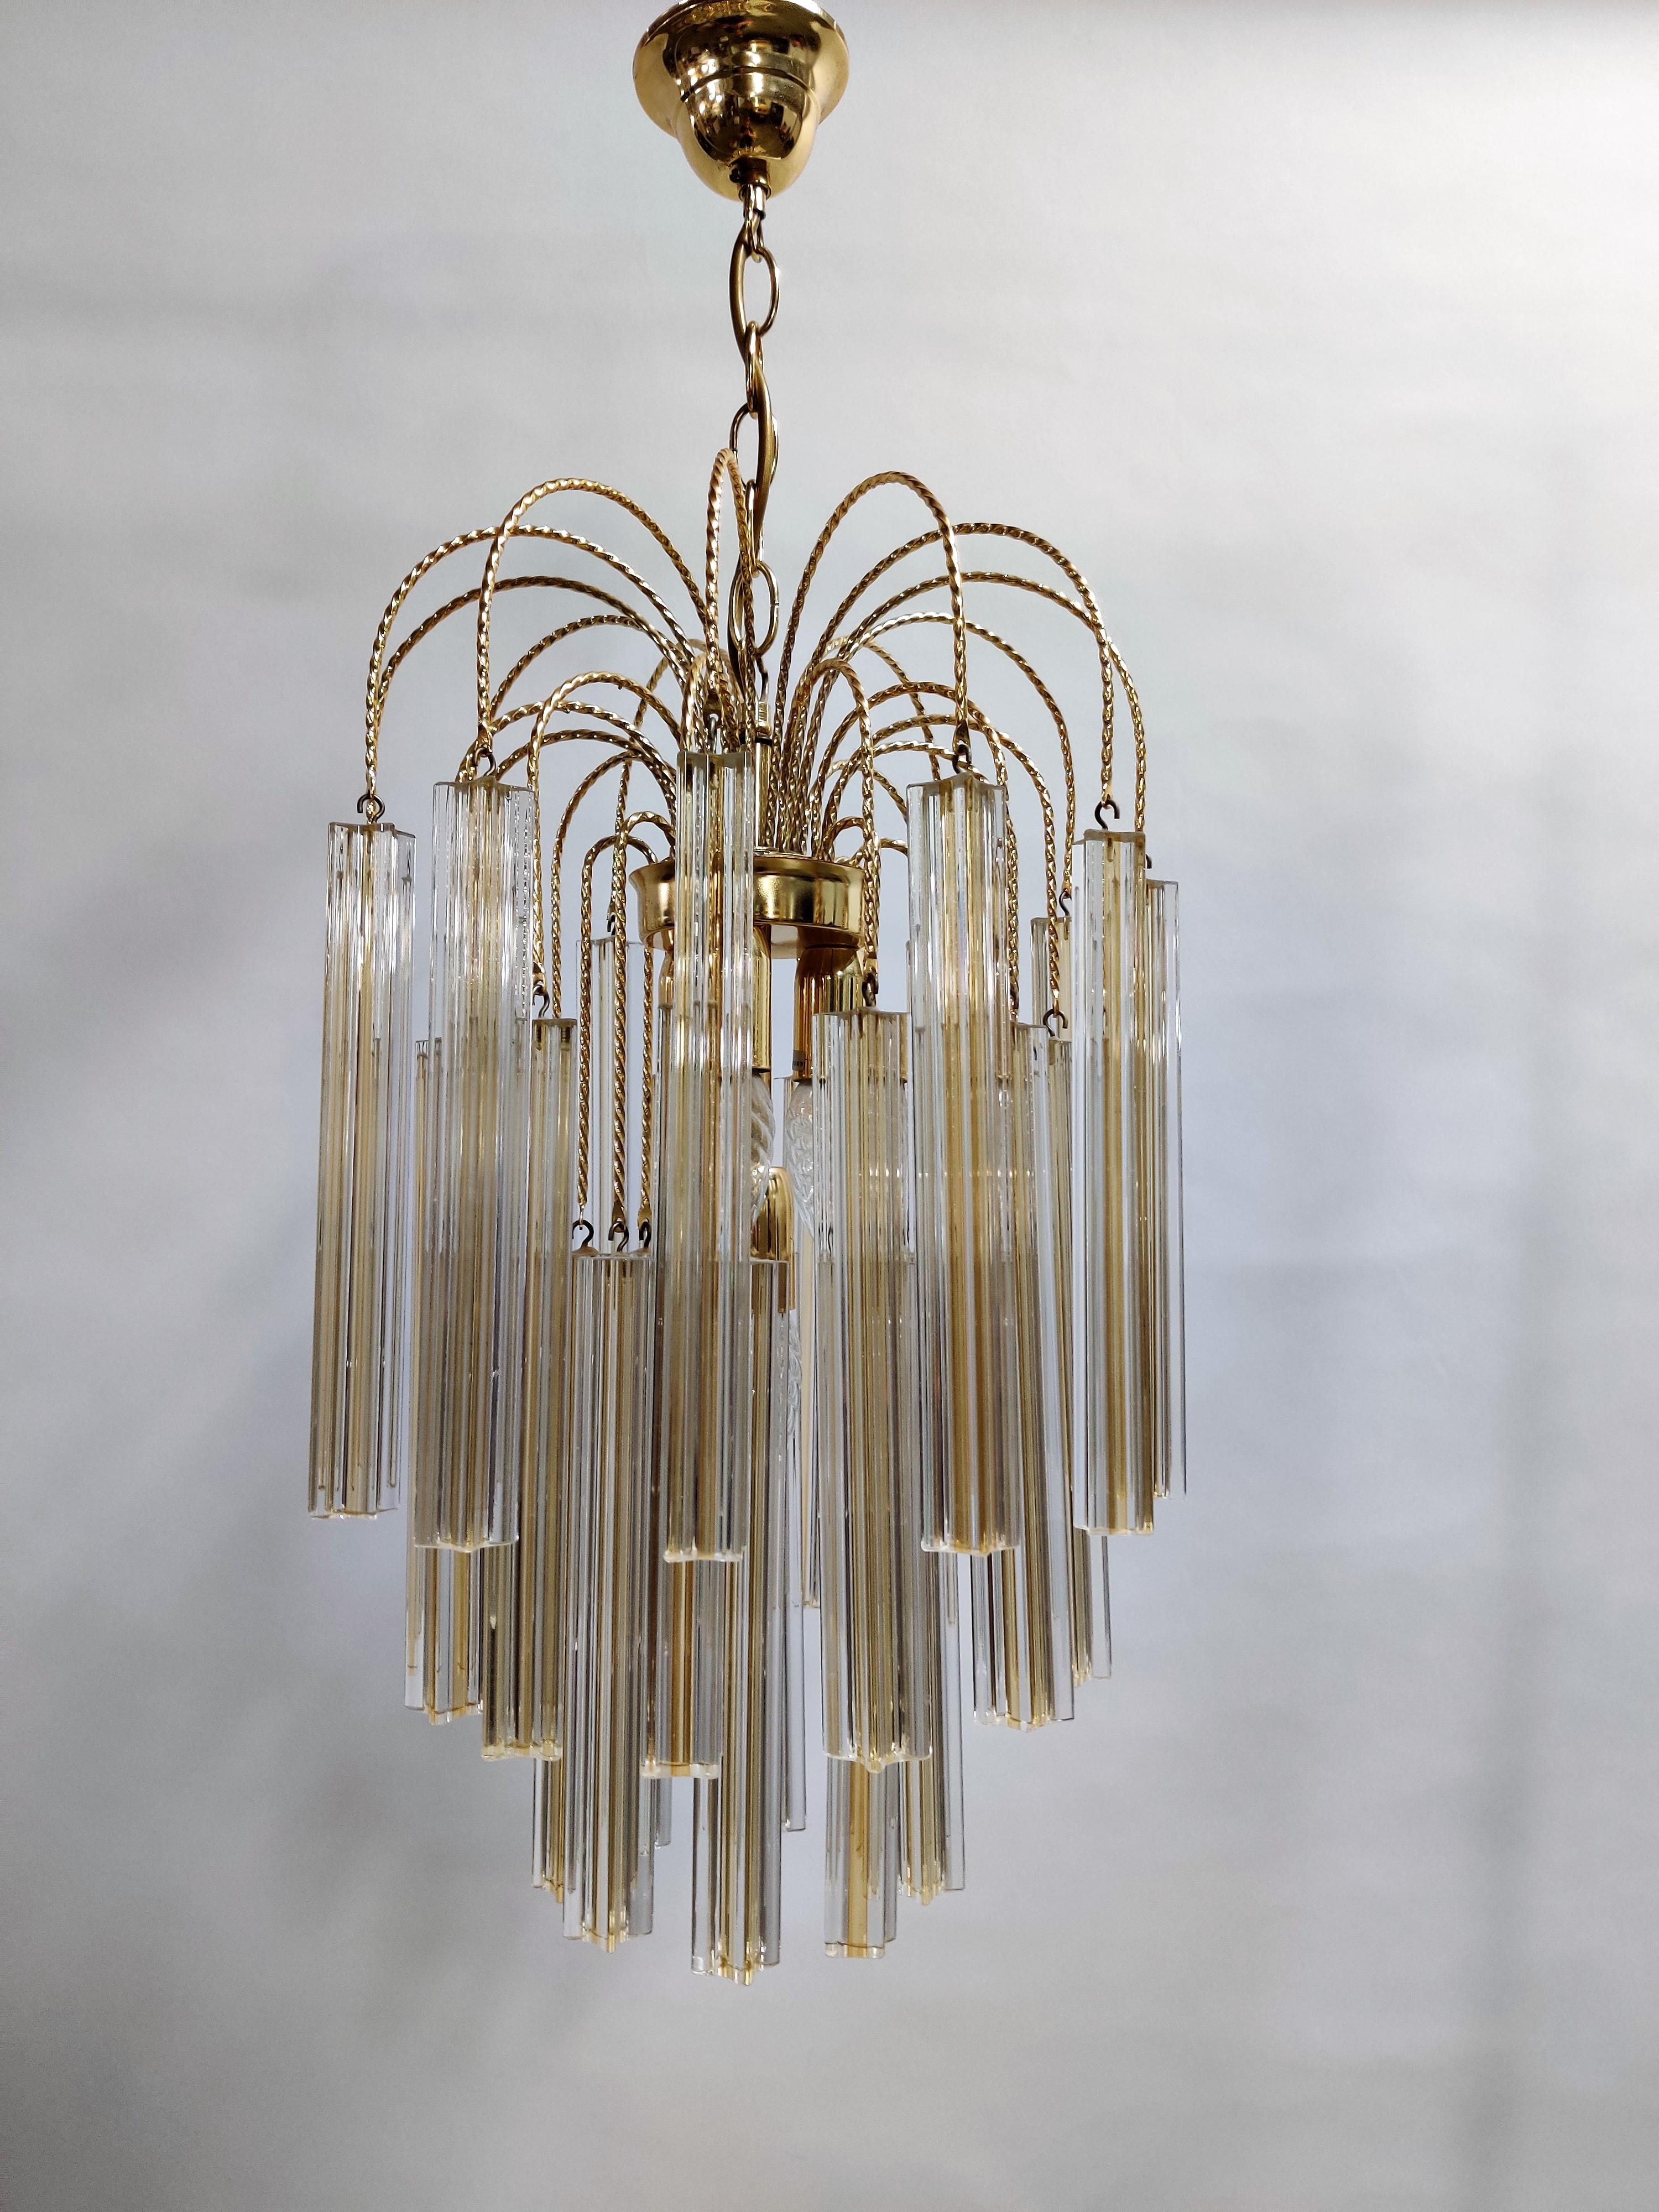 Very beautiful brass chandelier with handmade Murano Venini crystal glass.

The chandelier has multiple lightpoints, creating a beautiful warm light.

Perfect condition, no damages to the glass.

The chandelier has been tested and works with